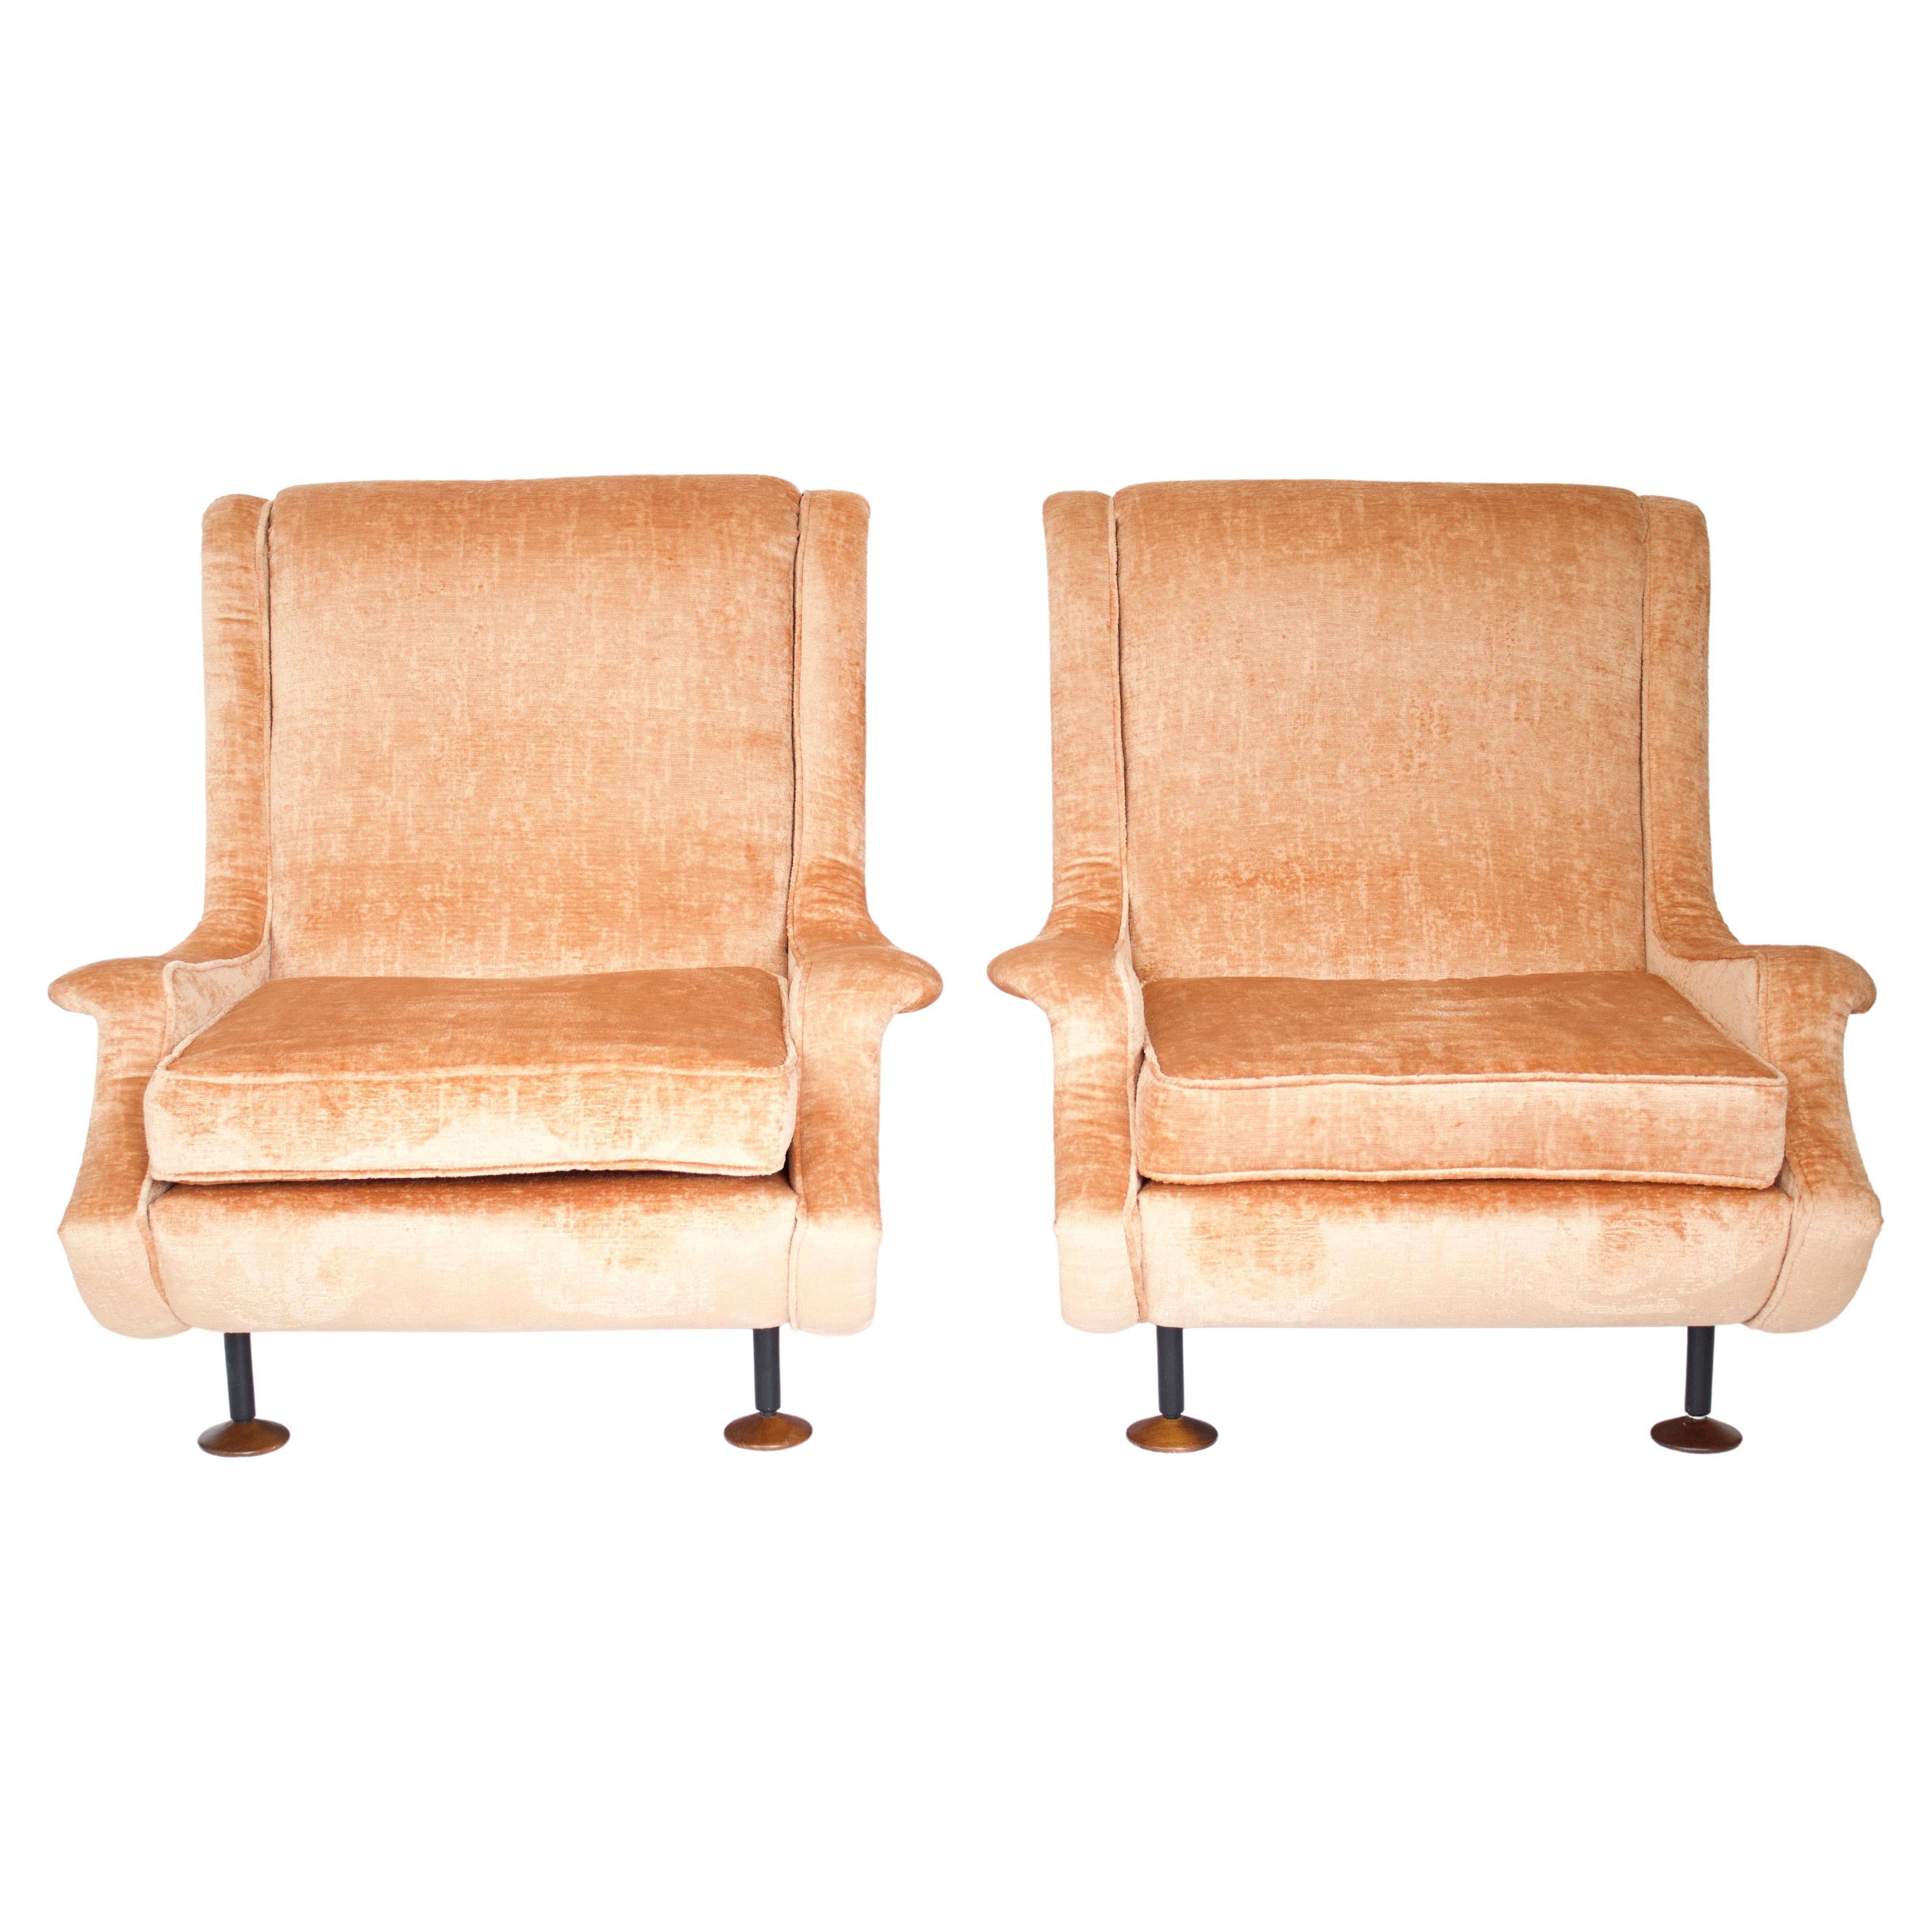 Marco Zanuso Pair of Regent Lounge Chairs for Arflex, Italy, 1960s